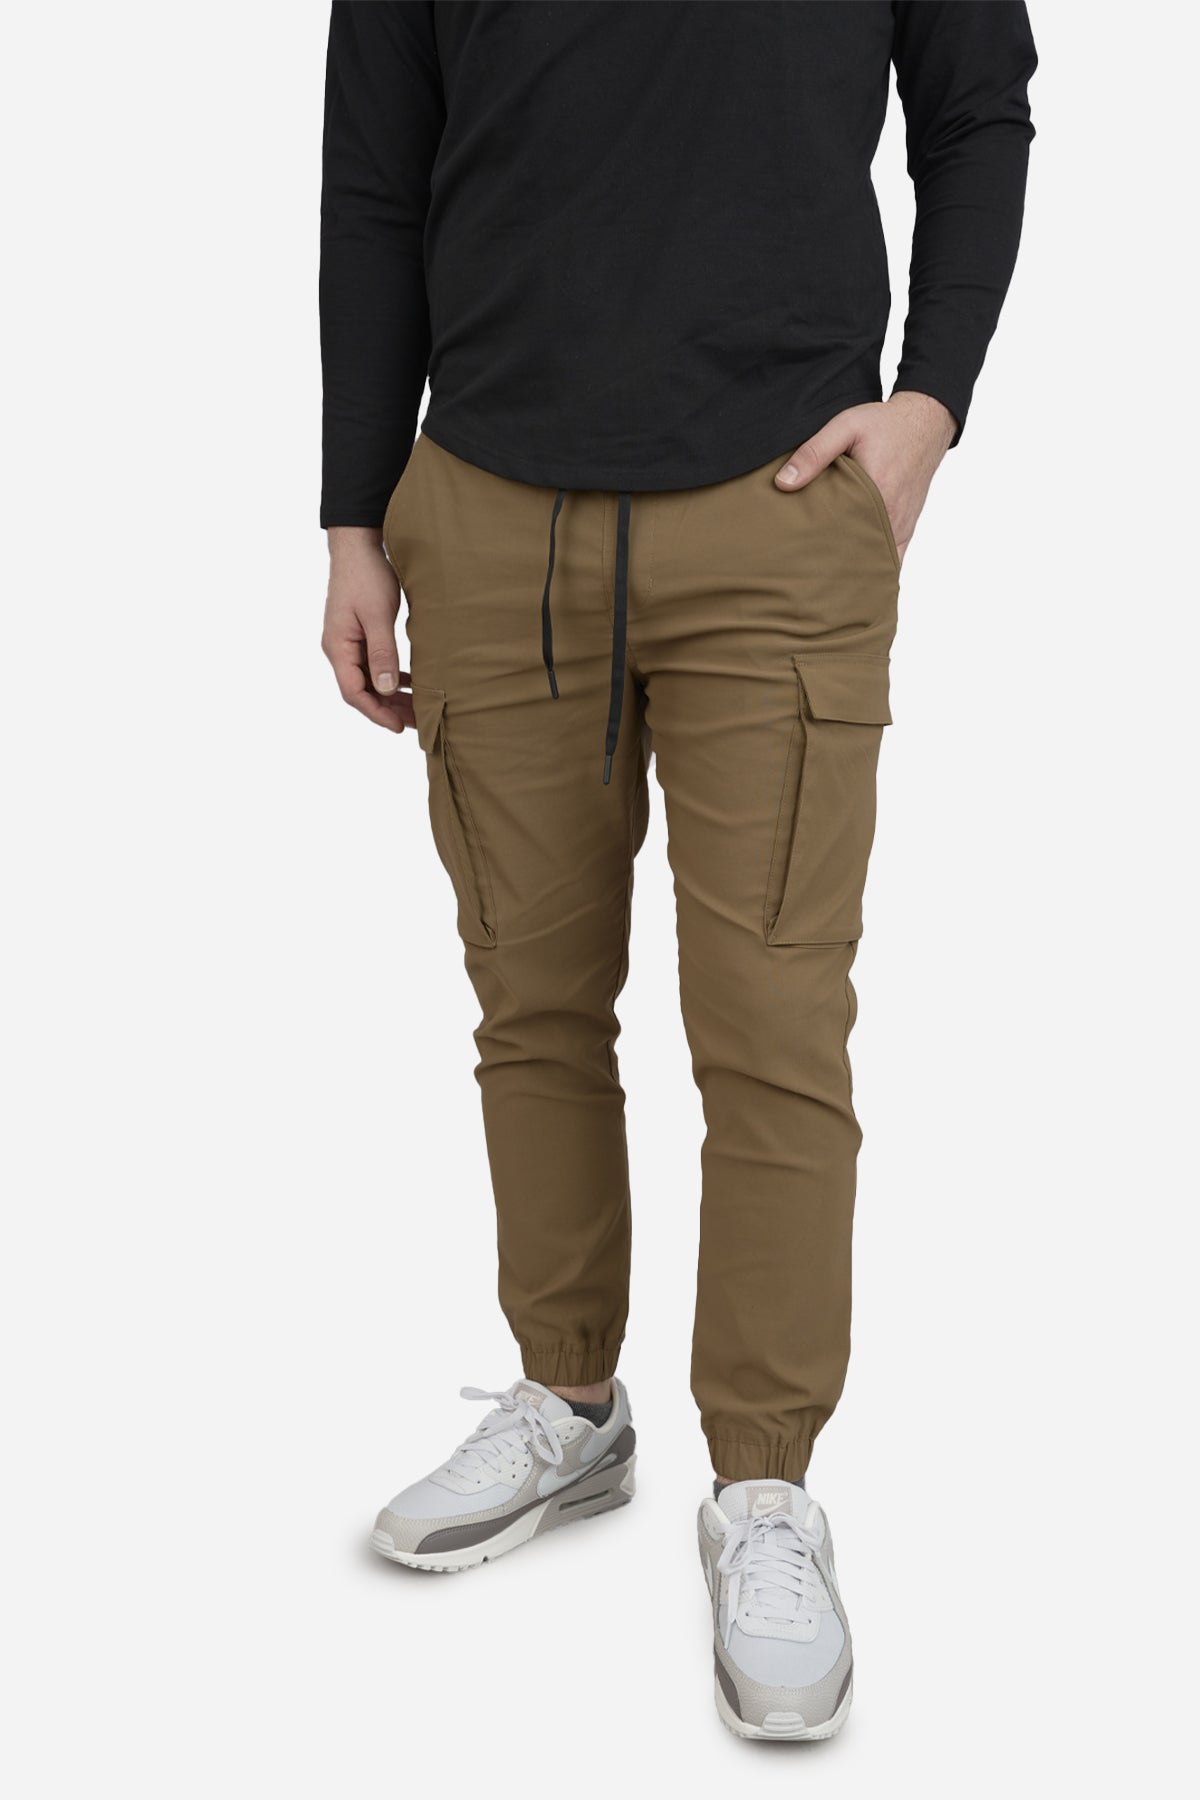 Solid Navy Blue Mens Cargo Joggers, Casual Wear at Rs 350/piece in Kolkata  | ID: 27157363188